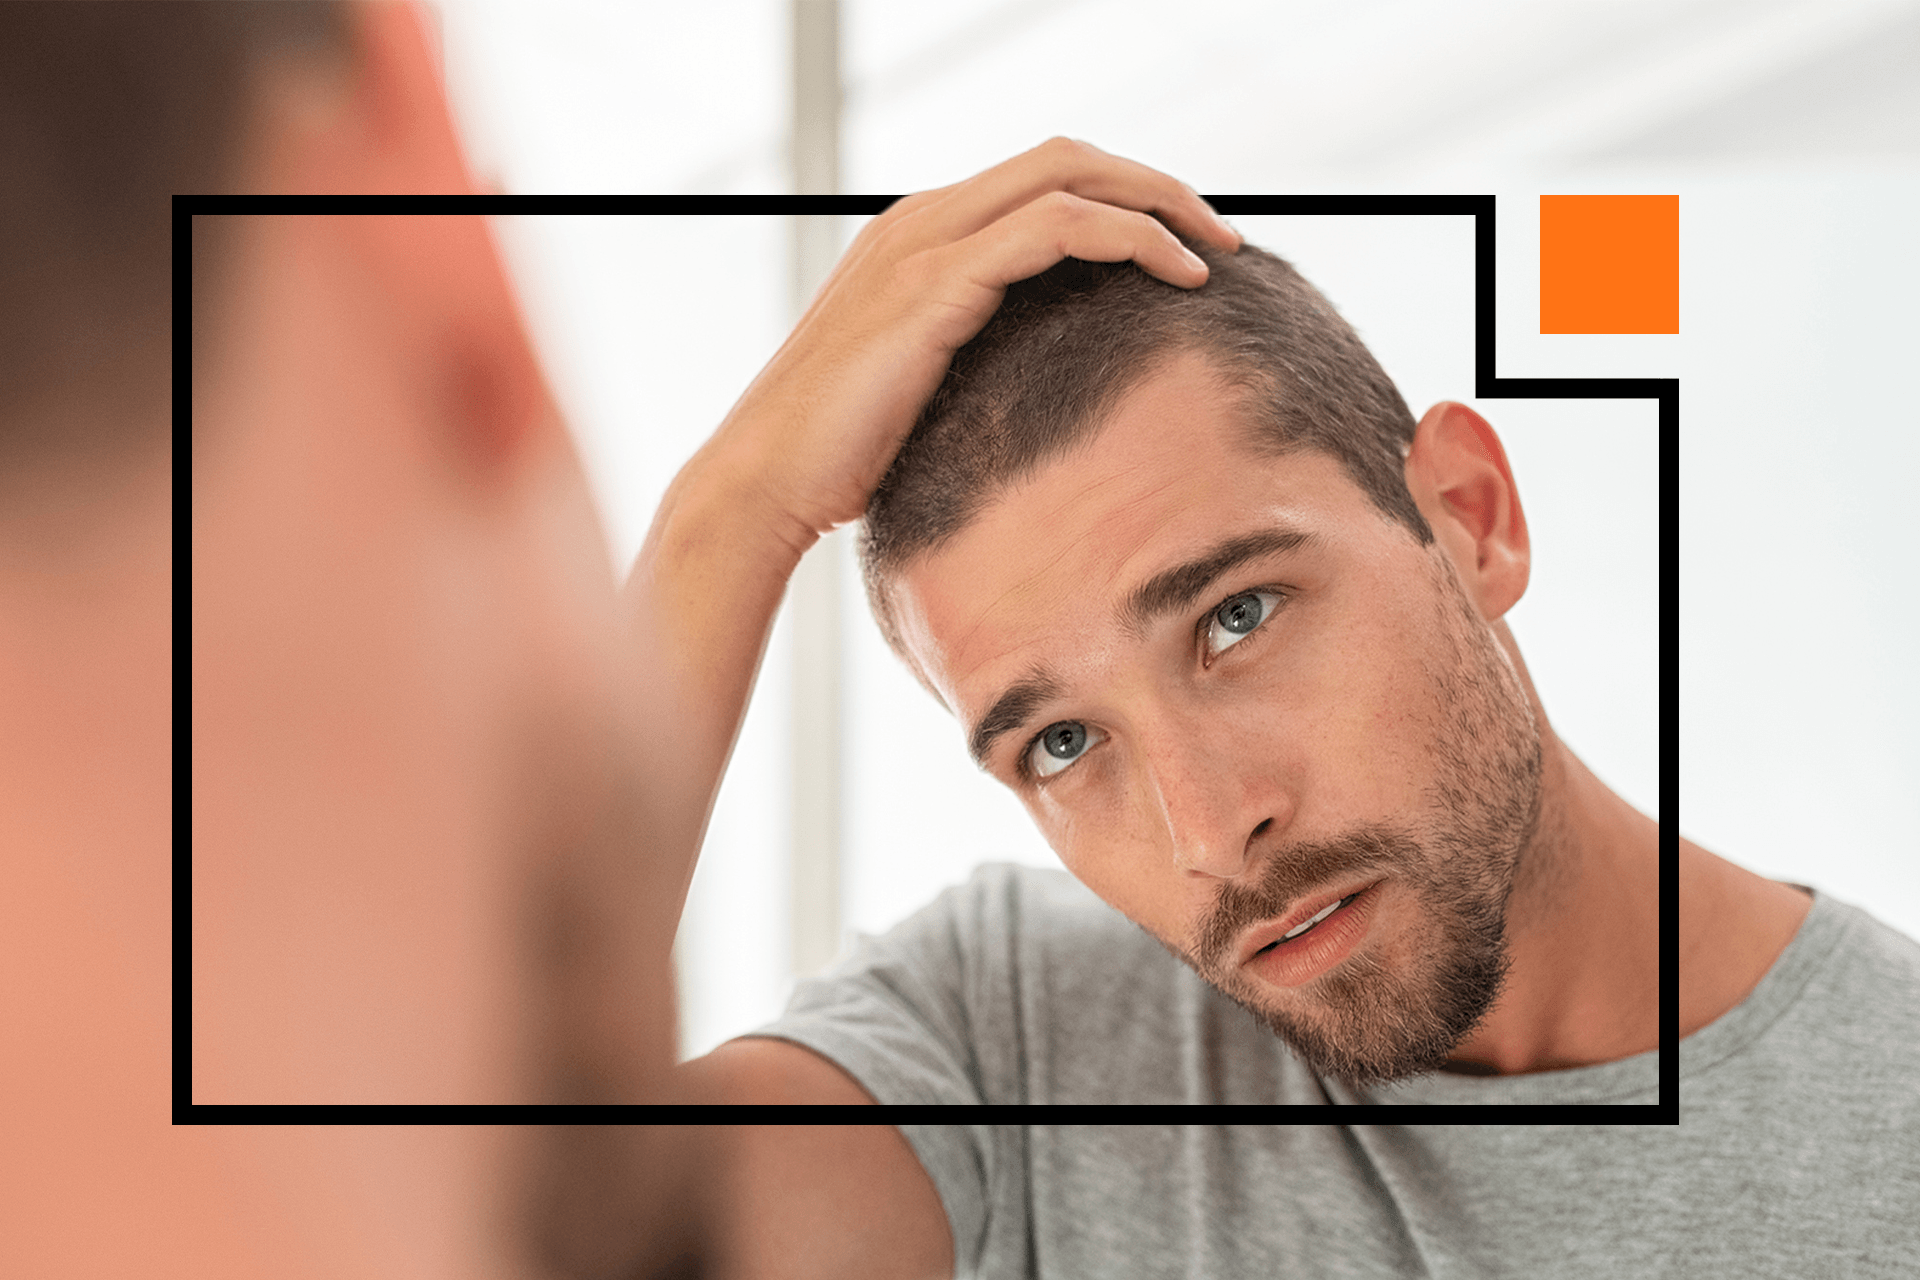 How to Cover Up a Bad Haircut: 8 Tips - Modded